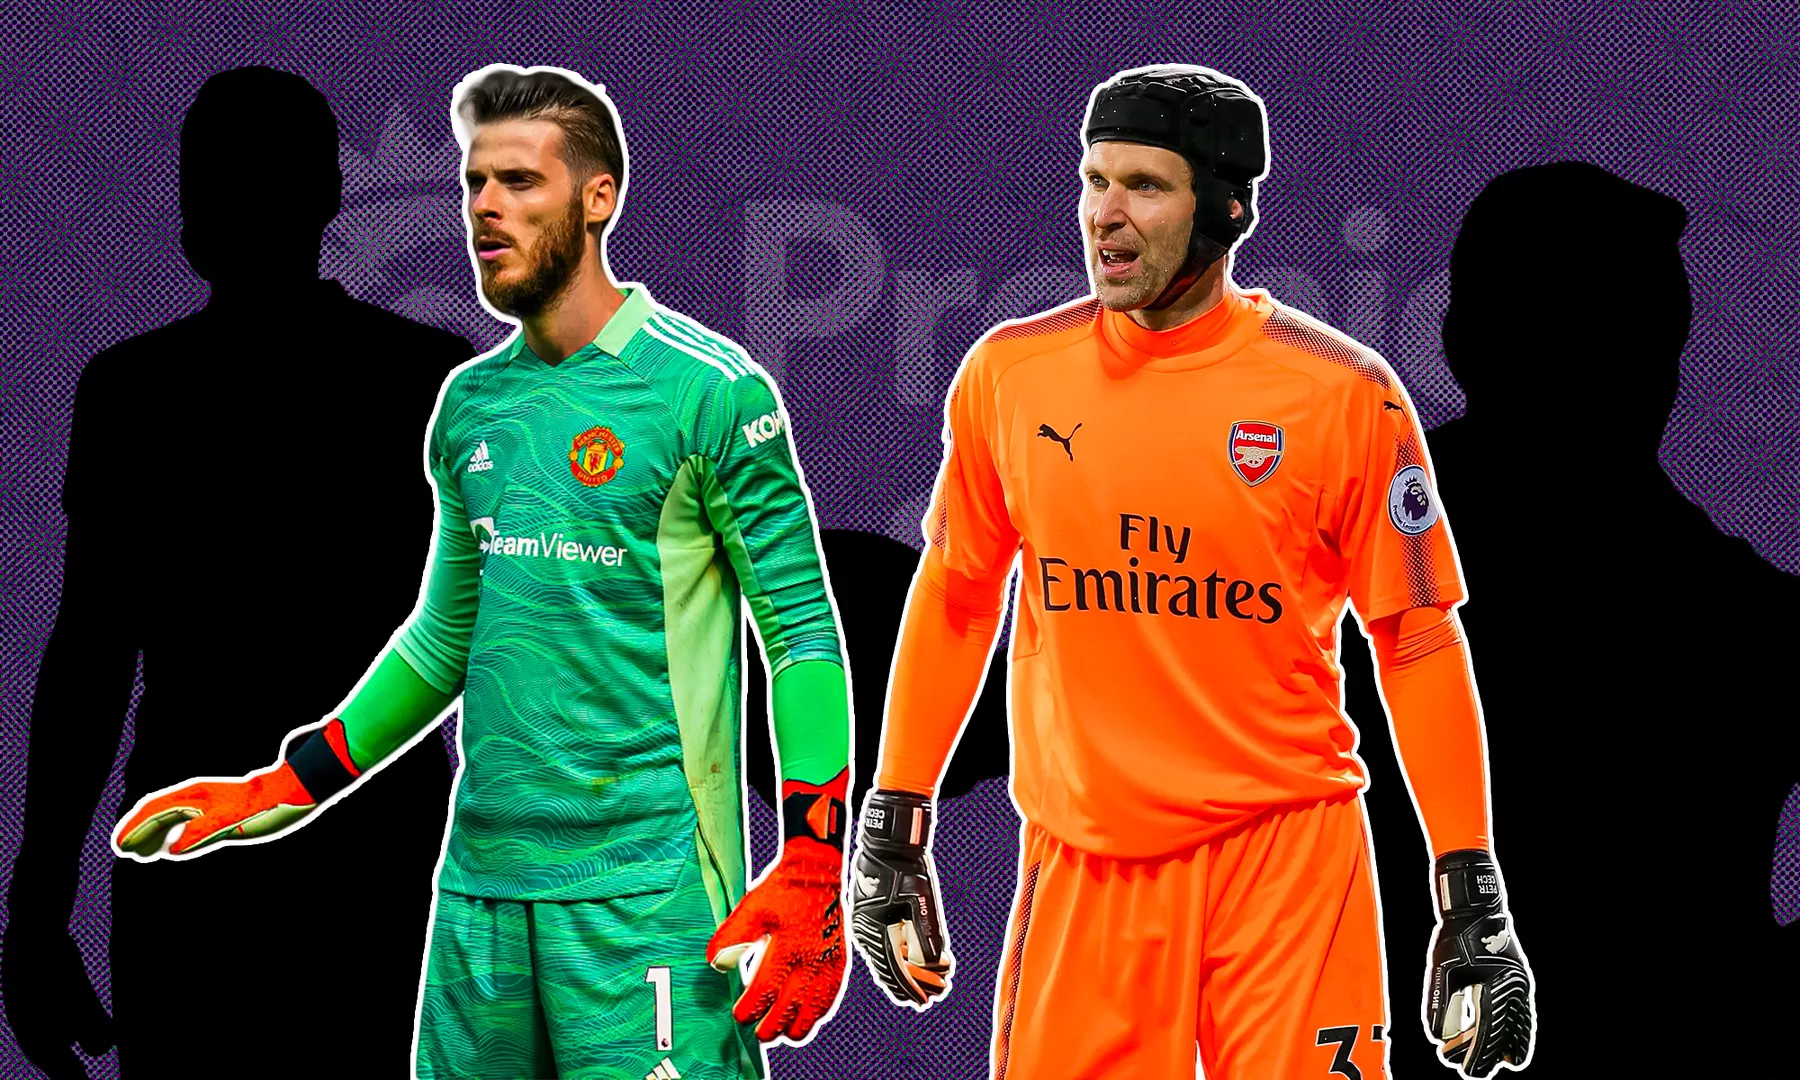 Top 10 goalkeepers with most clean sheets in Premier League